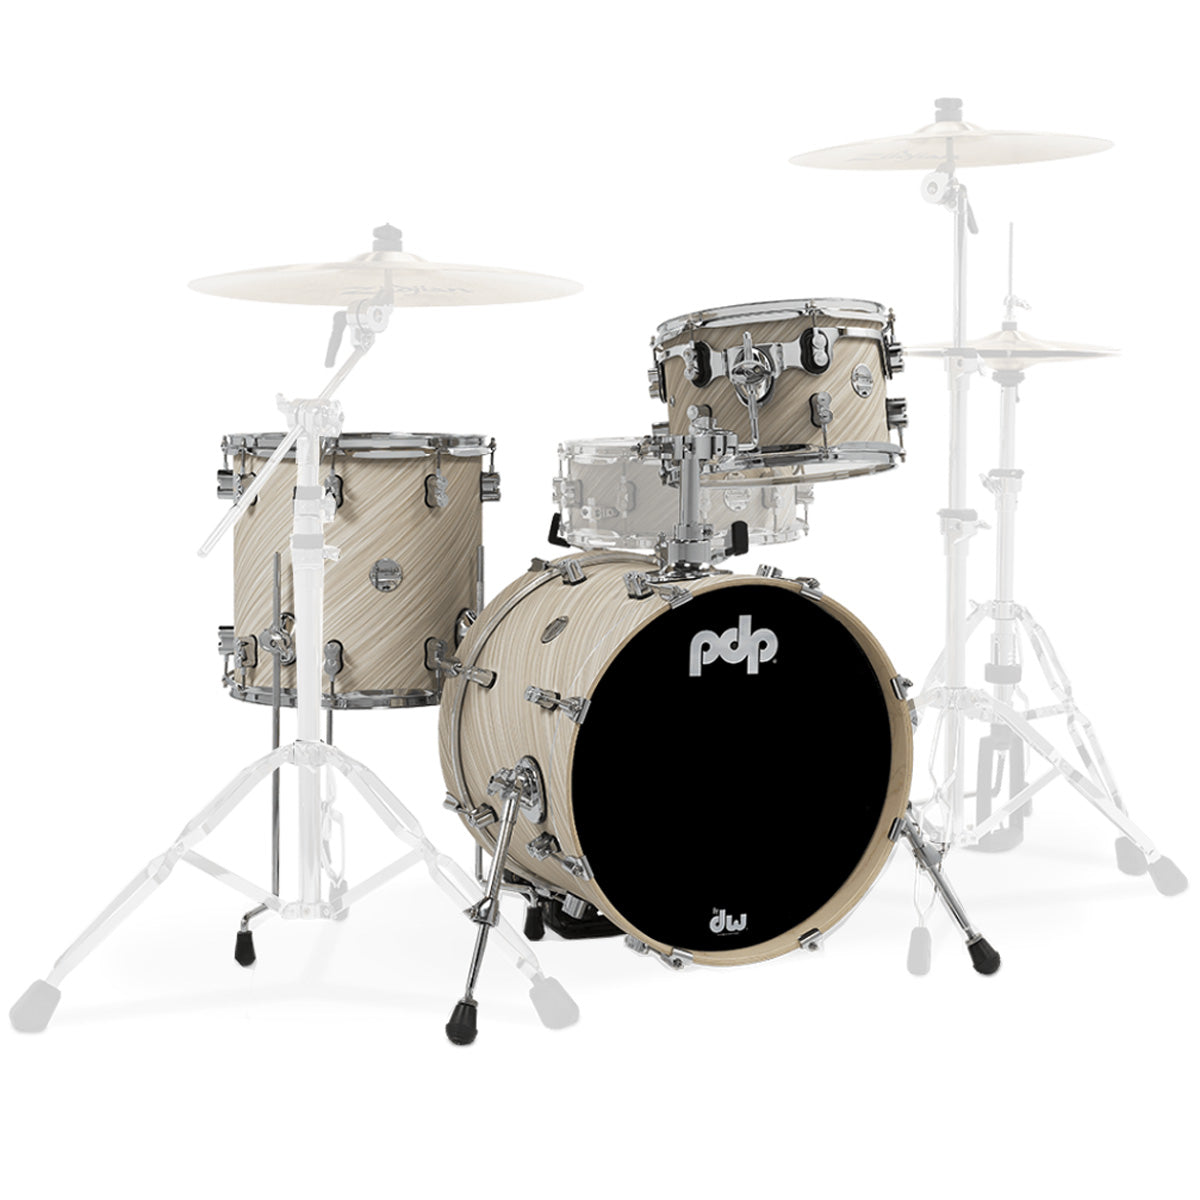 PDP by DW Concept Maple 3-Piece Bop Shell Pack - Finish Ply